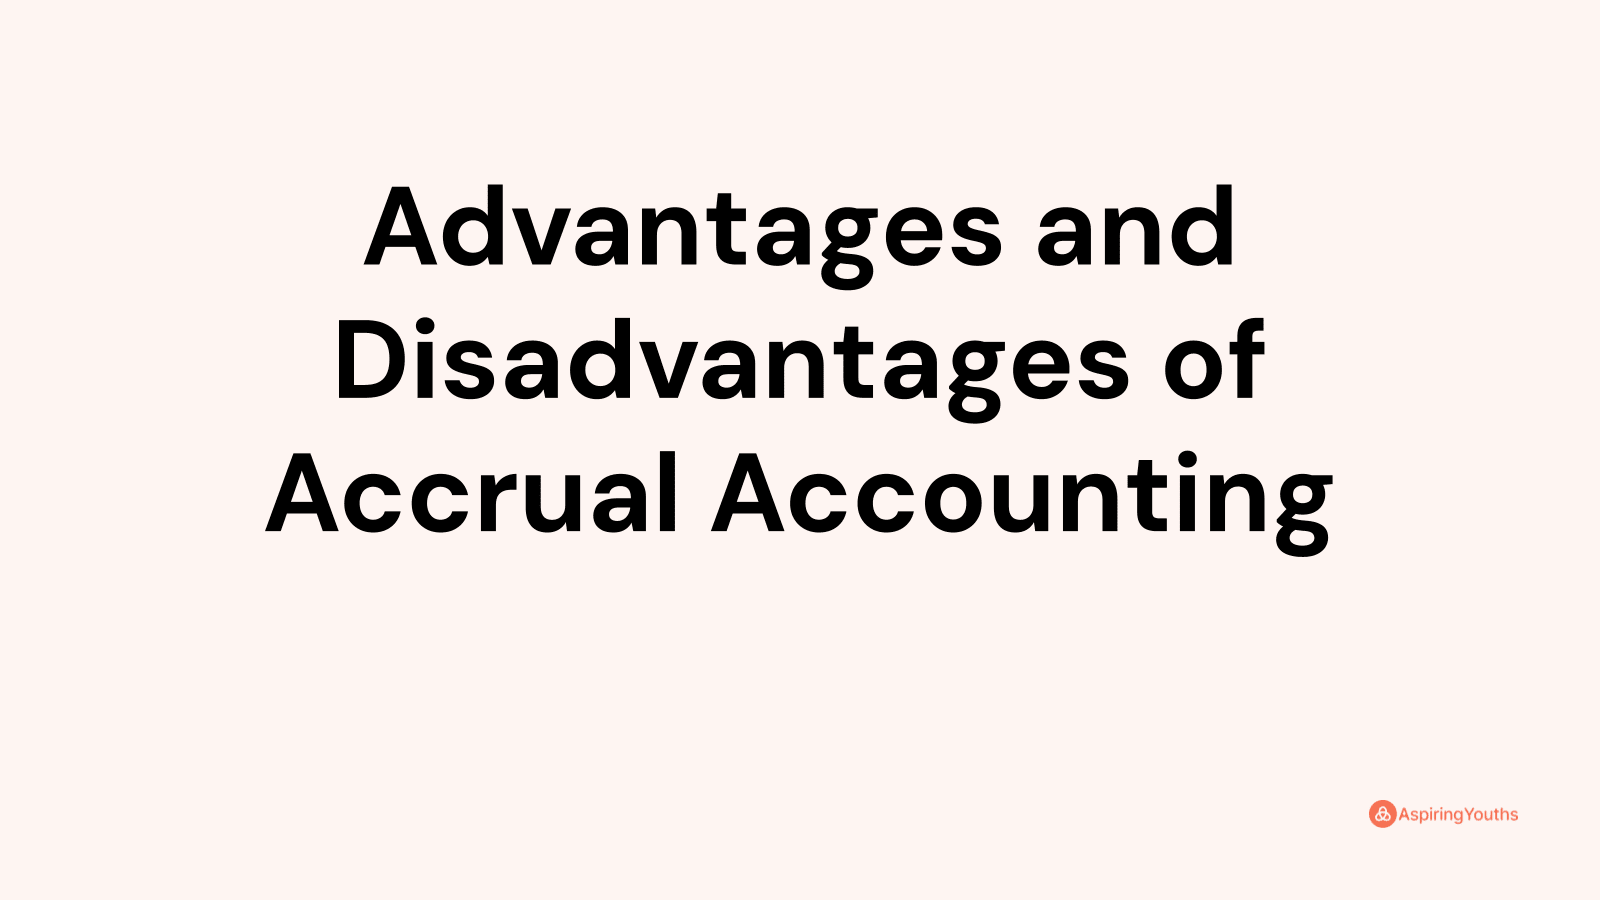 Advantages and disadvantages of Accrual Accounting